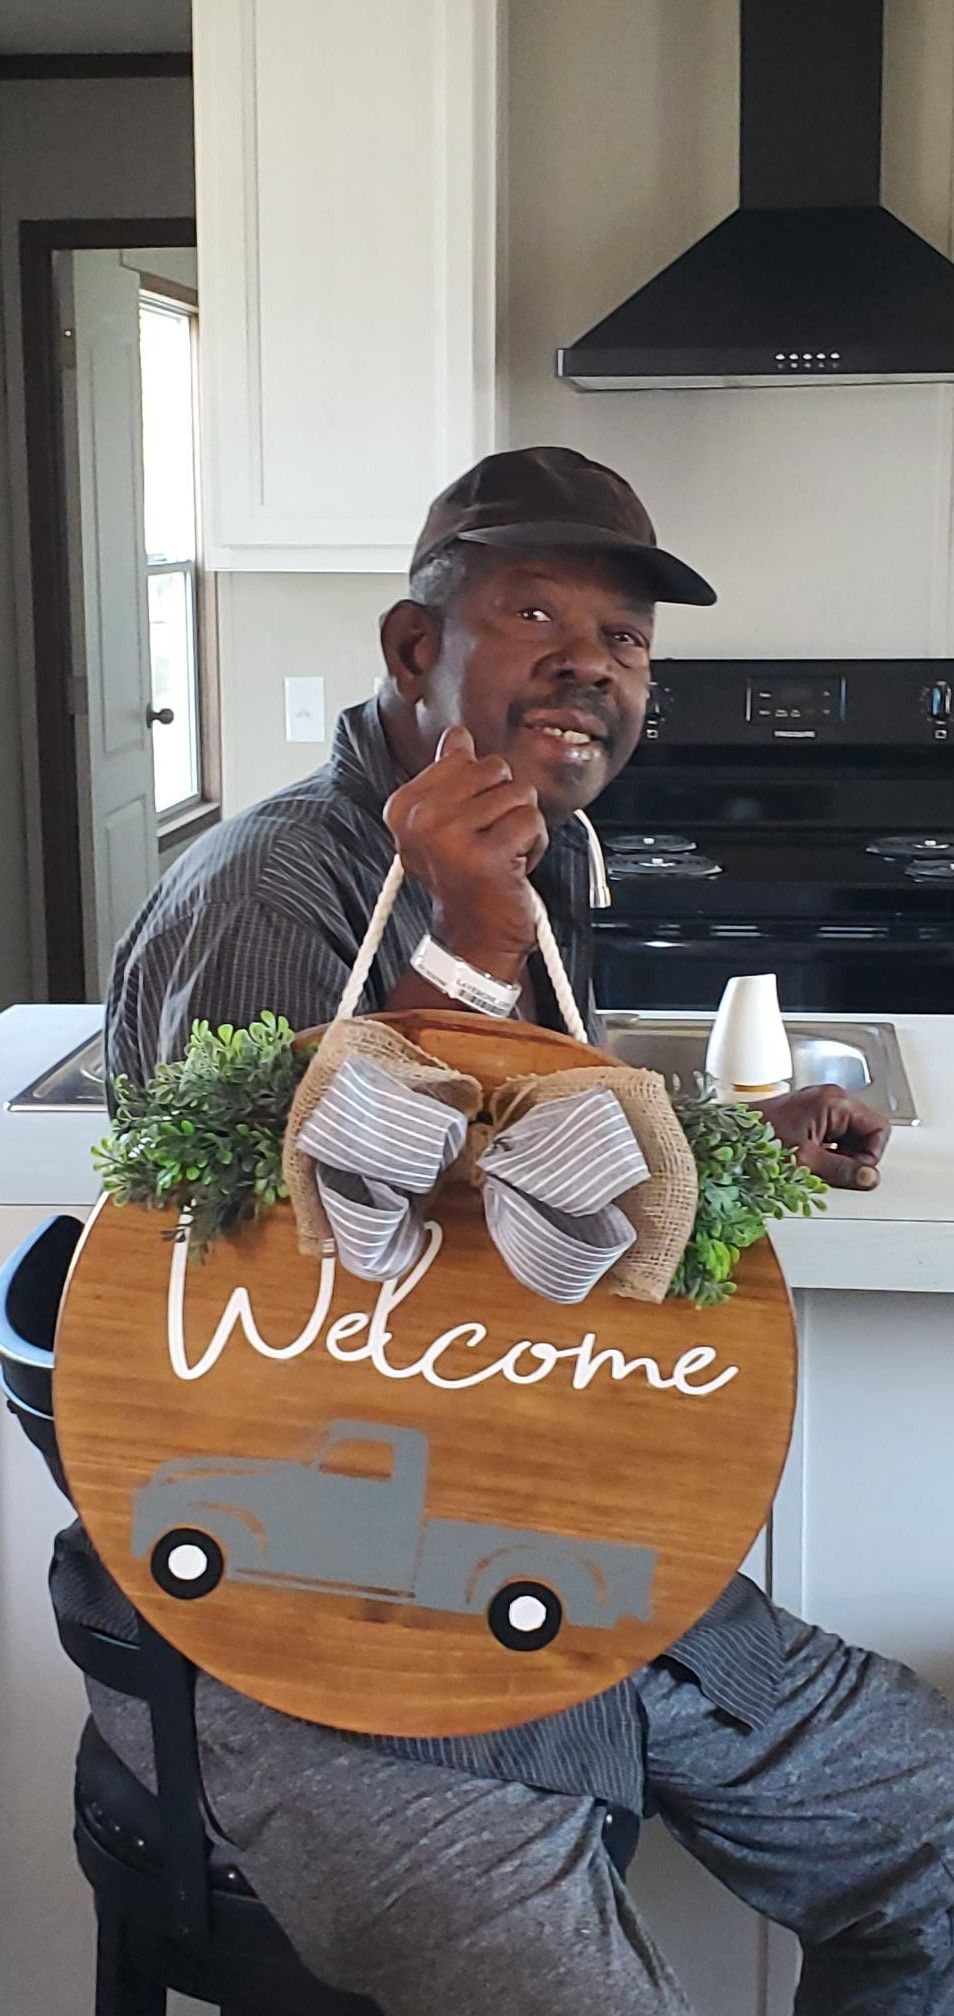 Leon L. welcome home image